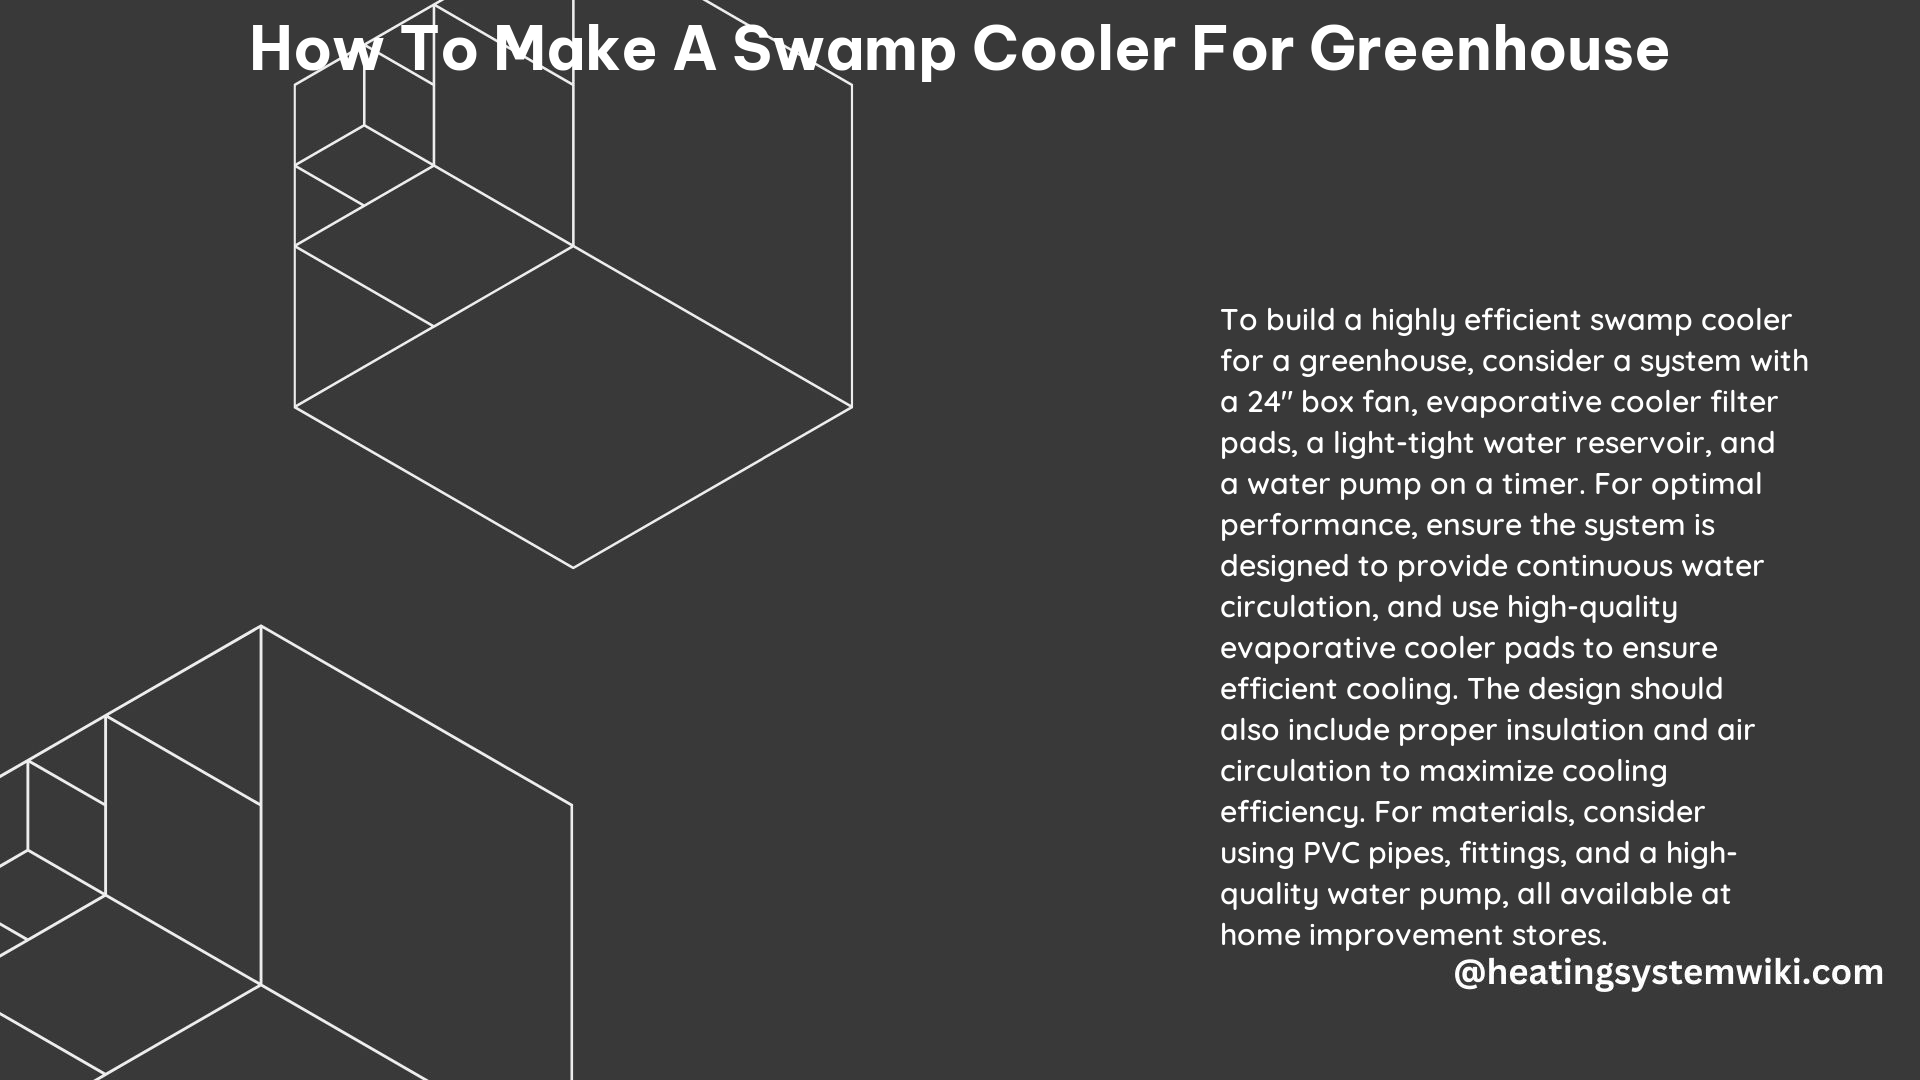 How to Make a Swamp Cooler for Greenhouse